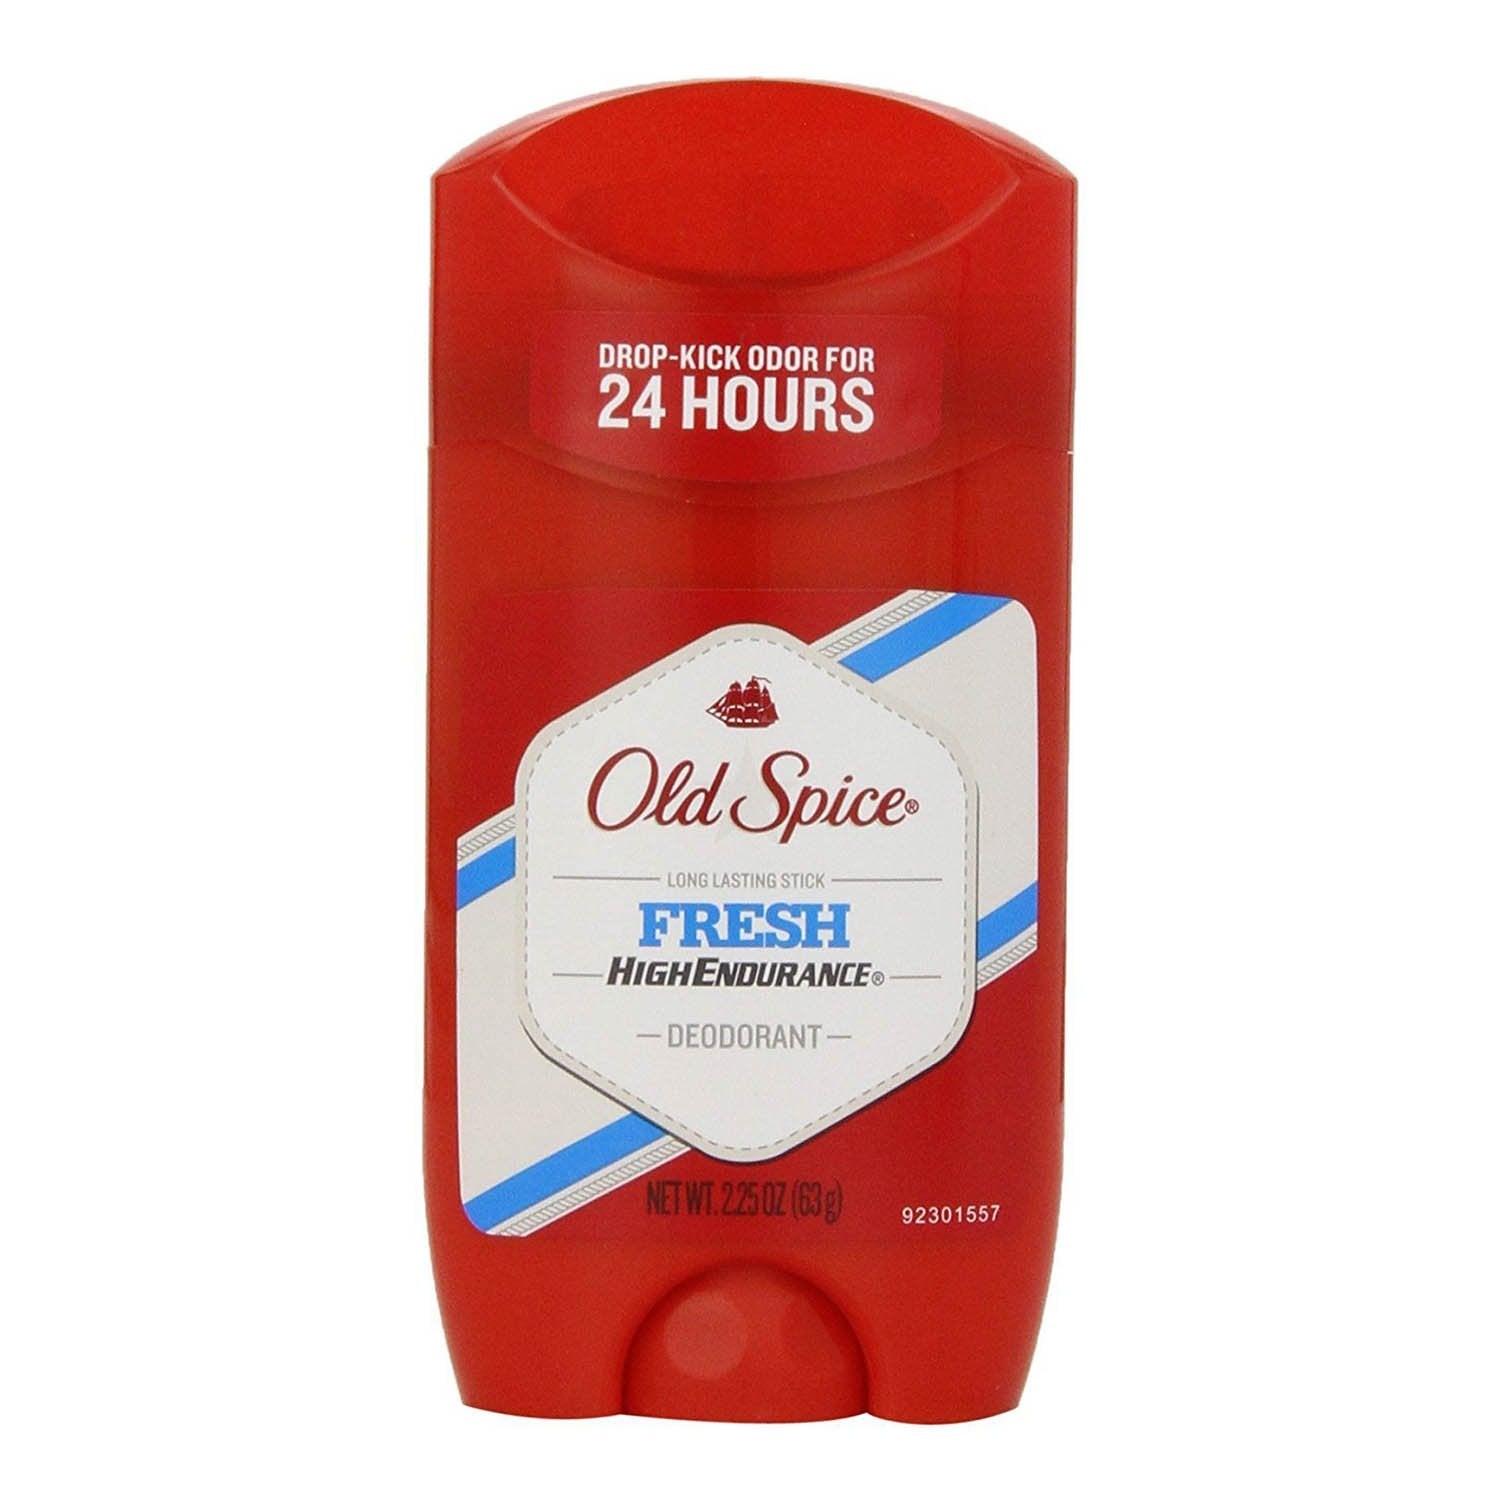 luckystore Personal Care > Body Products Old spice fresh Deodorant Stick Imported 63g